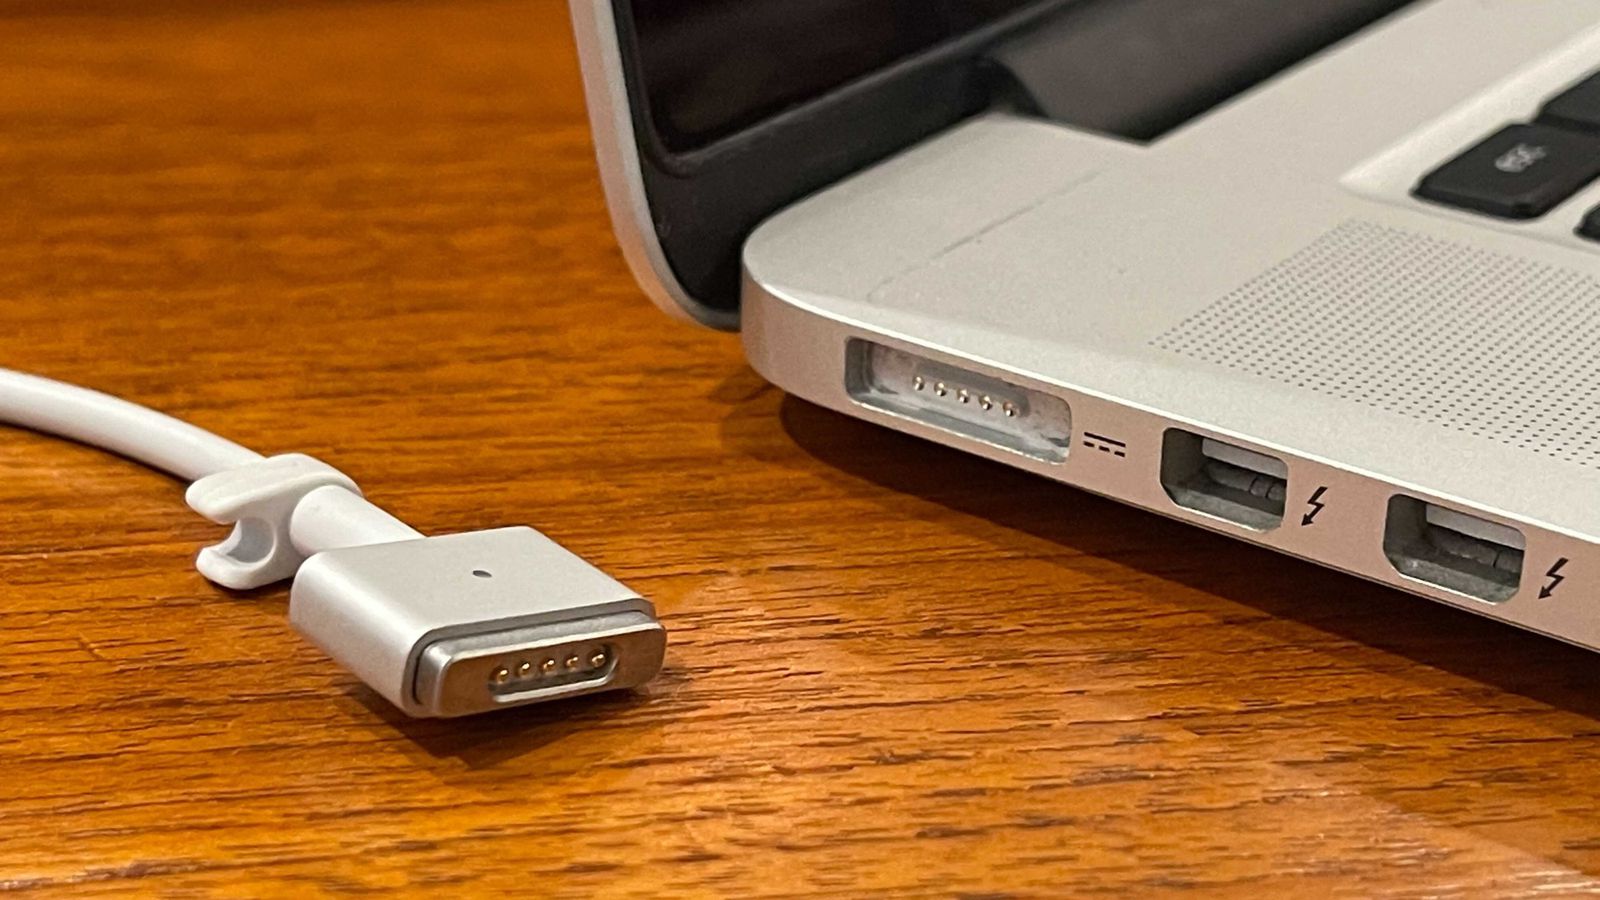 Thorny hule Alfabet MagSafe is Coming Back to the Mac: A Look Back at Apple's Original Magnetic  Charging Technology - MacRumors